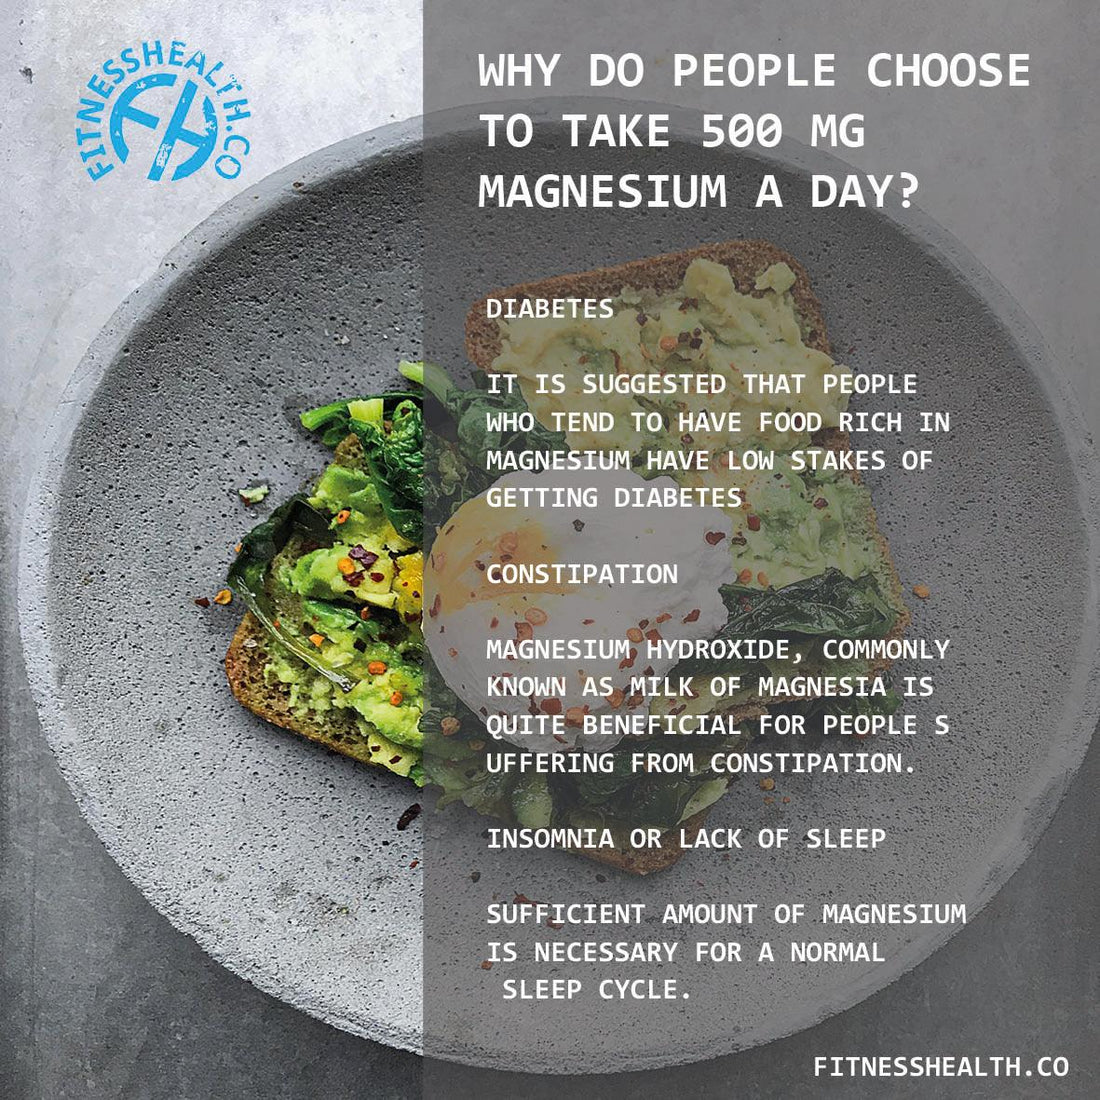 Why do people choose to take 500 mg magnesium a day? - Fitness Health 